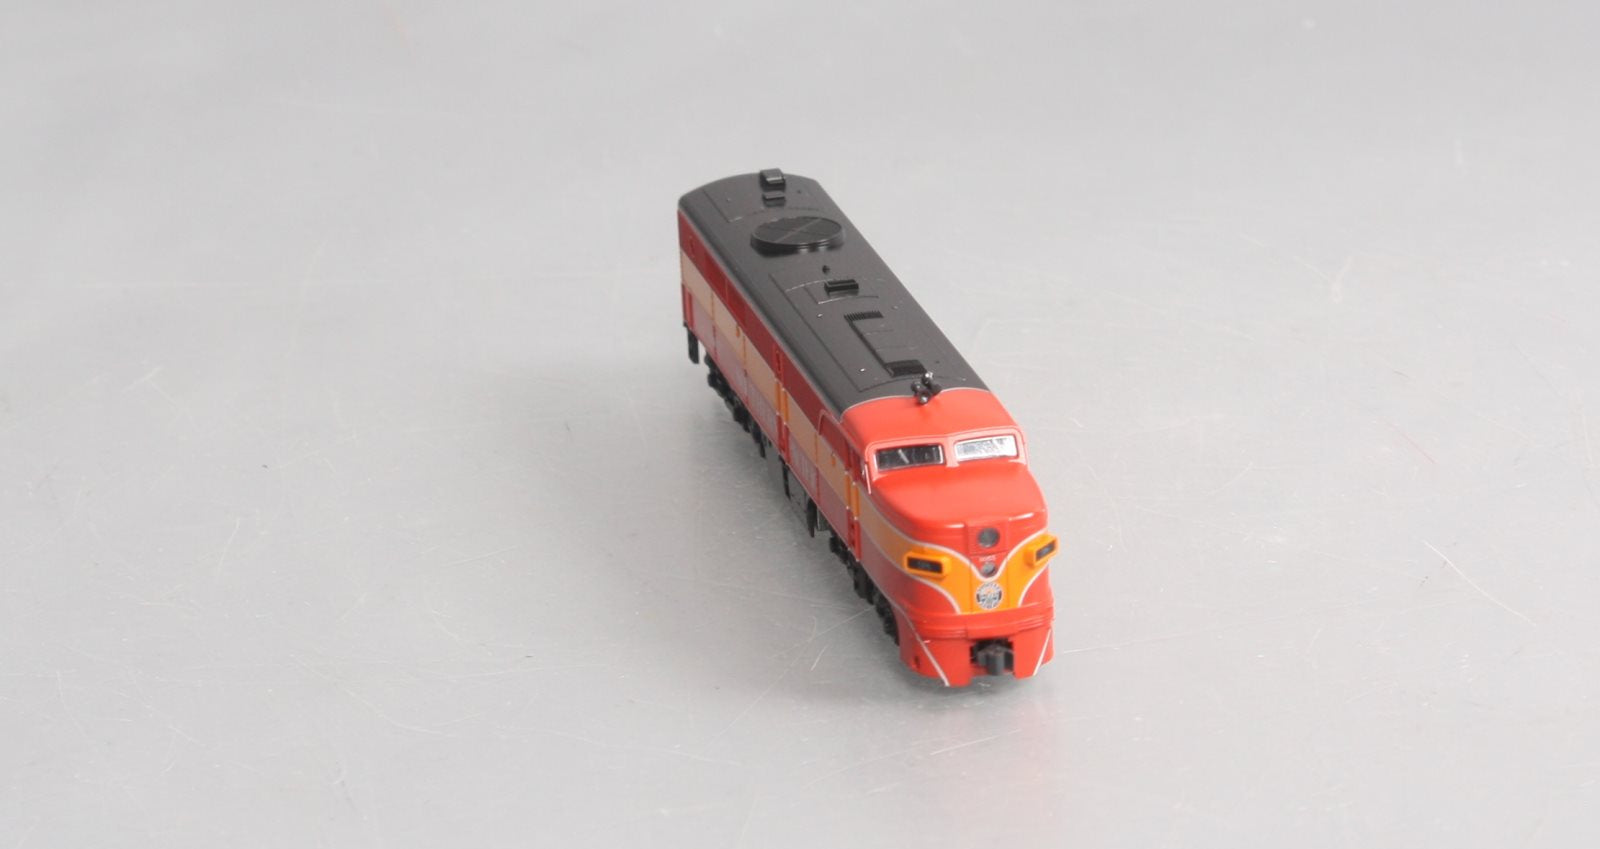 Kato 176-4104 N Scale Southern Pacific PA-1 Diesel Locomotive #6055